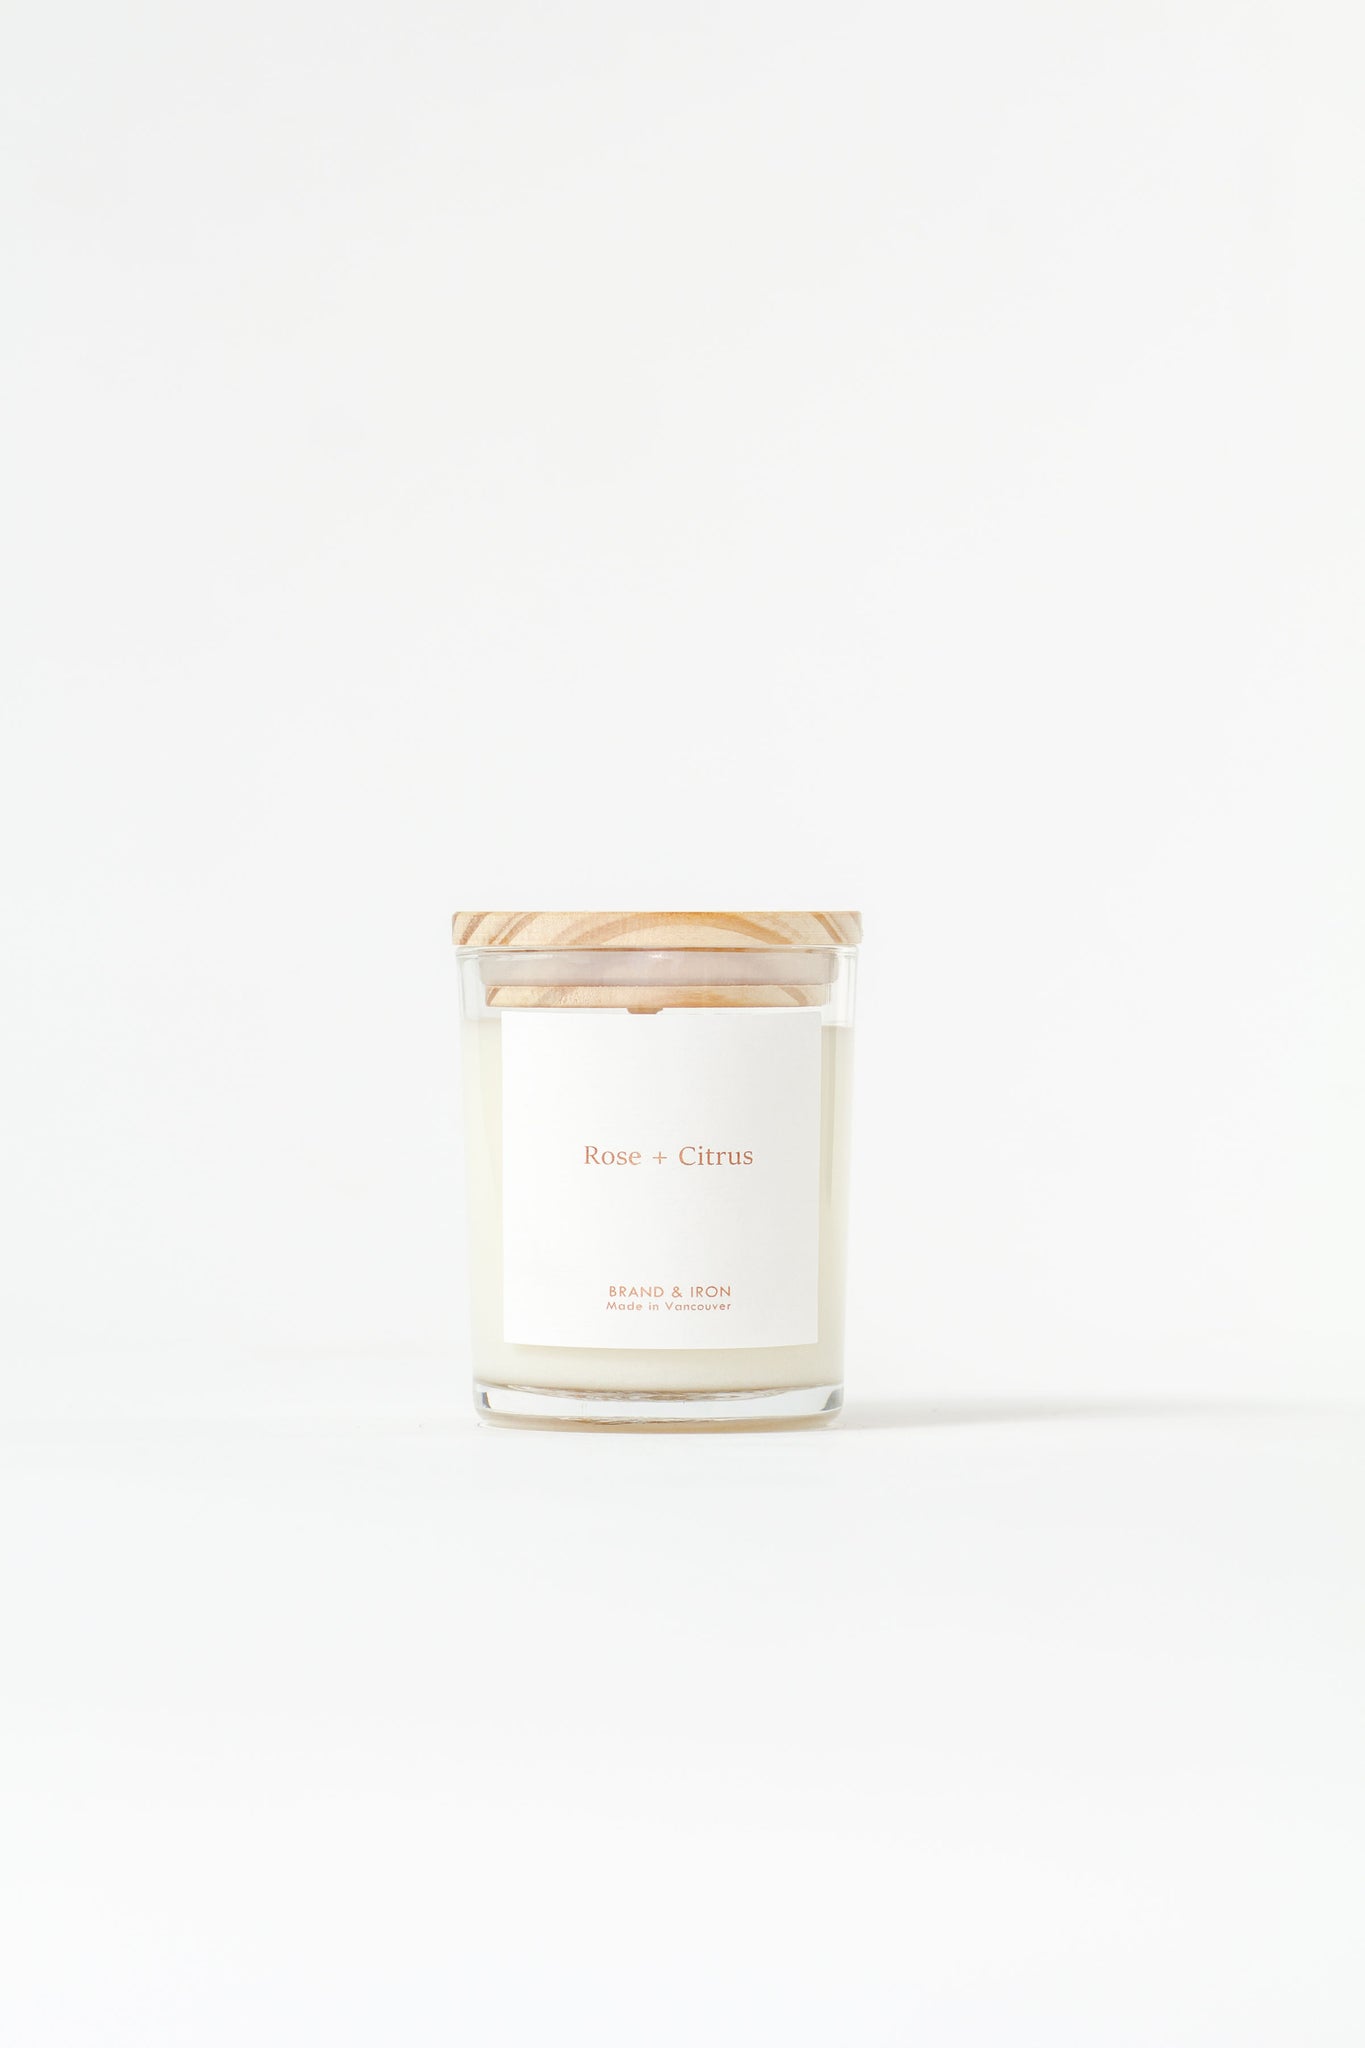 Rose + Citrus Candle | Brand and Iron